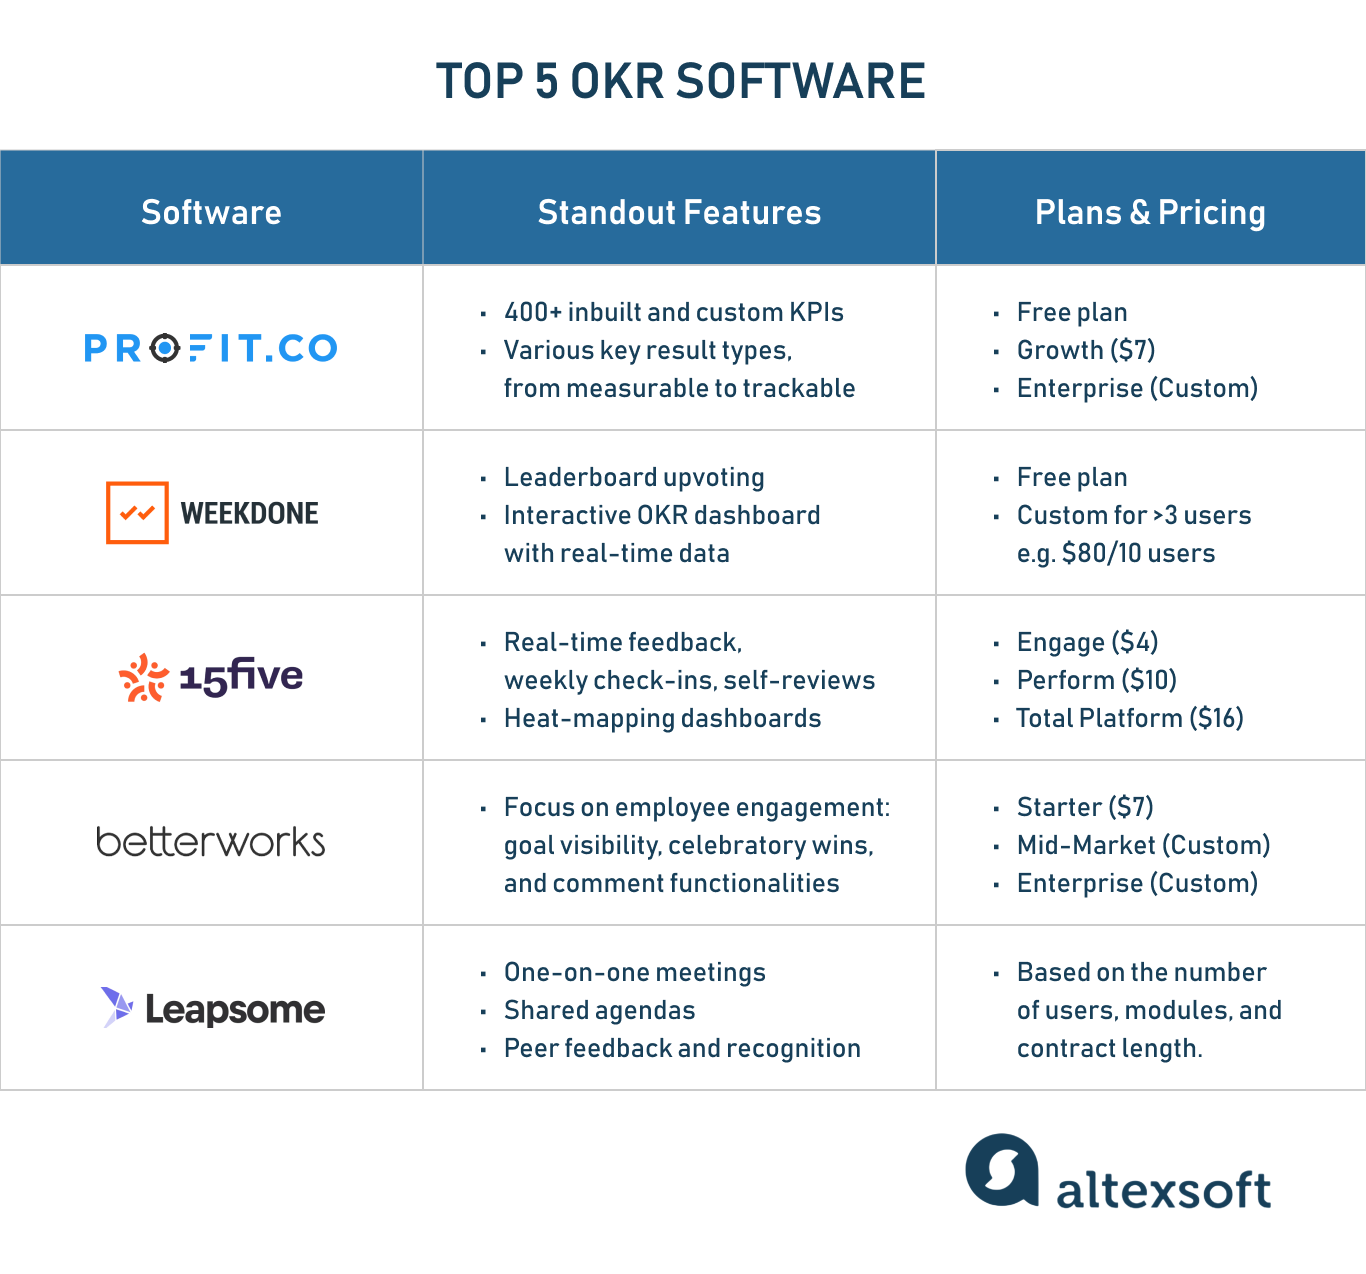 A table that shows a general overview of top 5 OKR software highlighting standout features and pricing plans of each tool